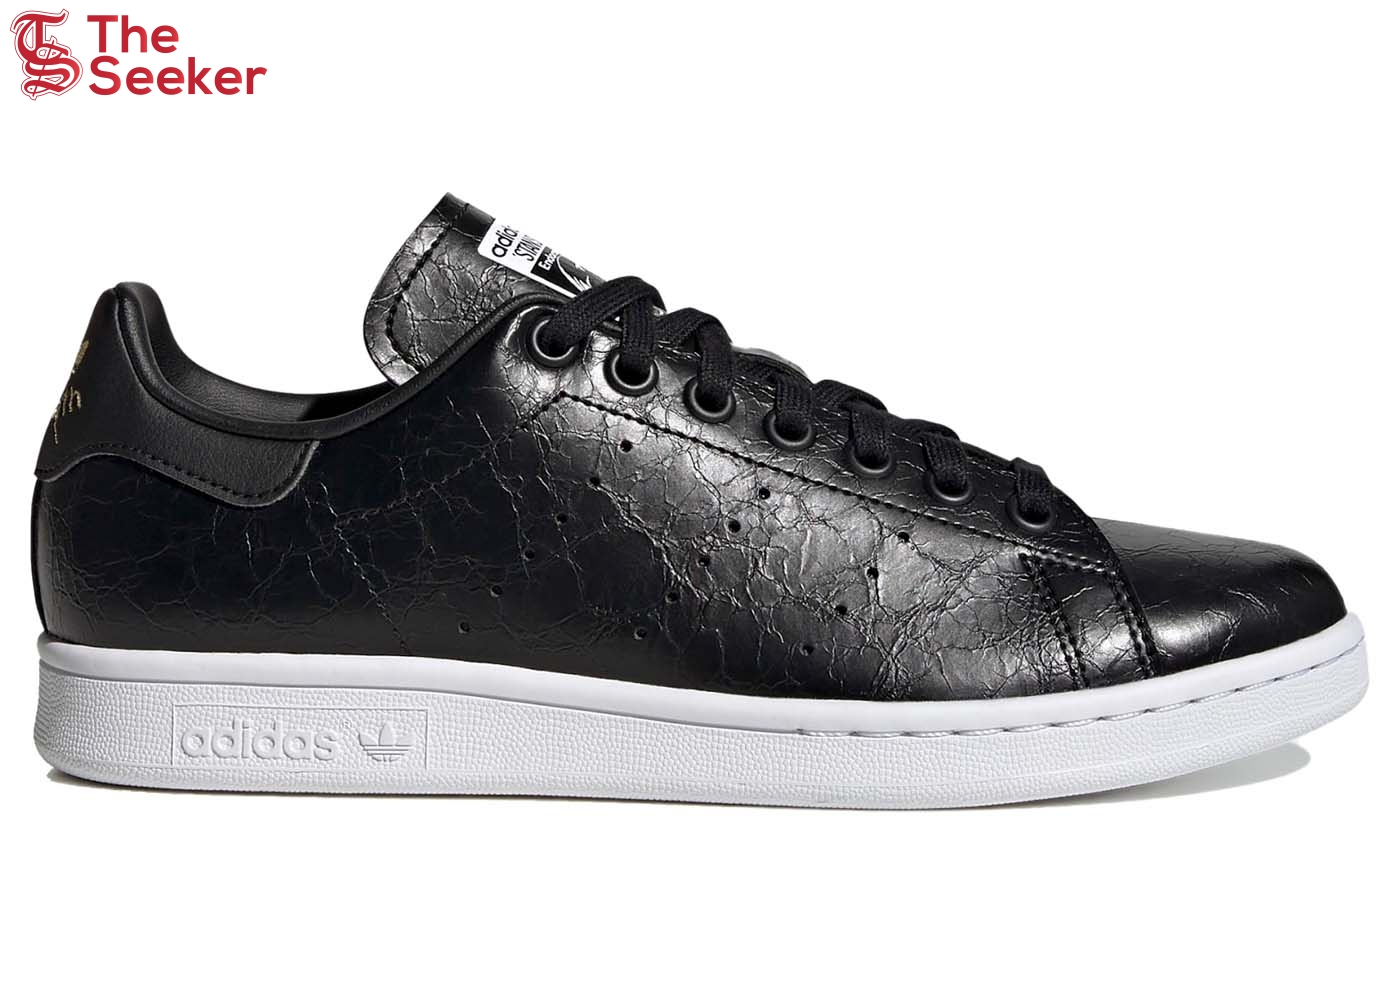 adidas Stan Smith Cracked Leather Black Gold (Women's)